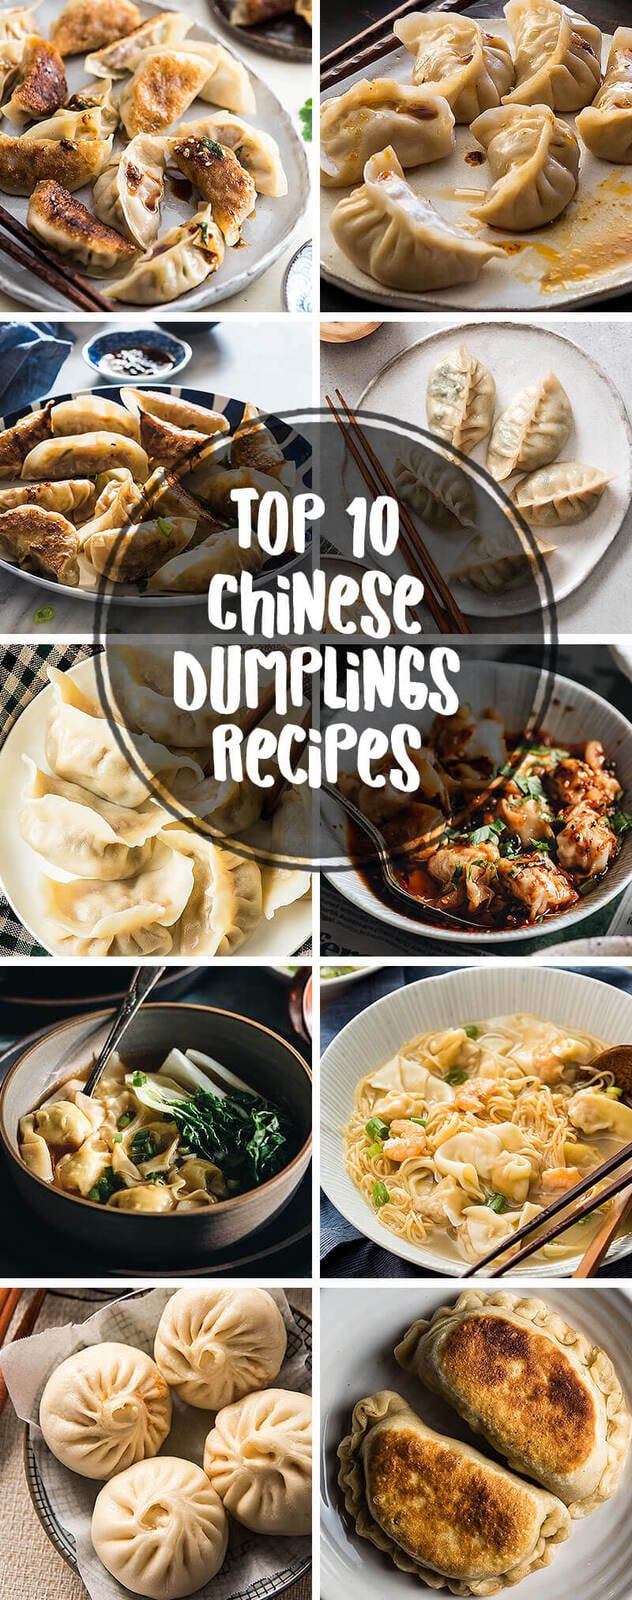 Top 10 Chinese Dumplings Recipes for Chinese New Year